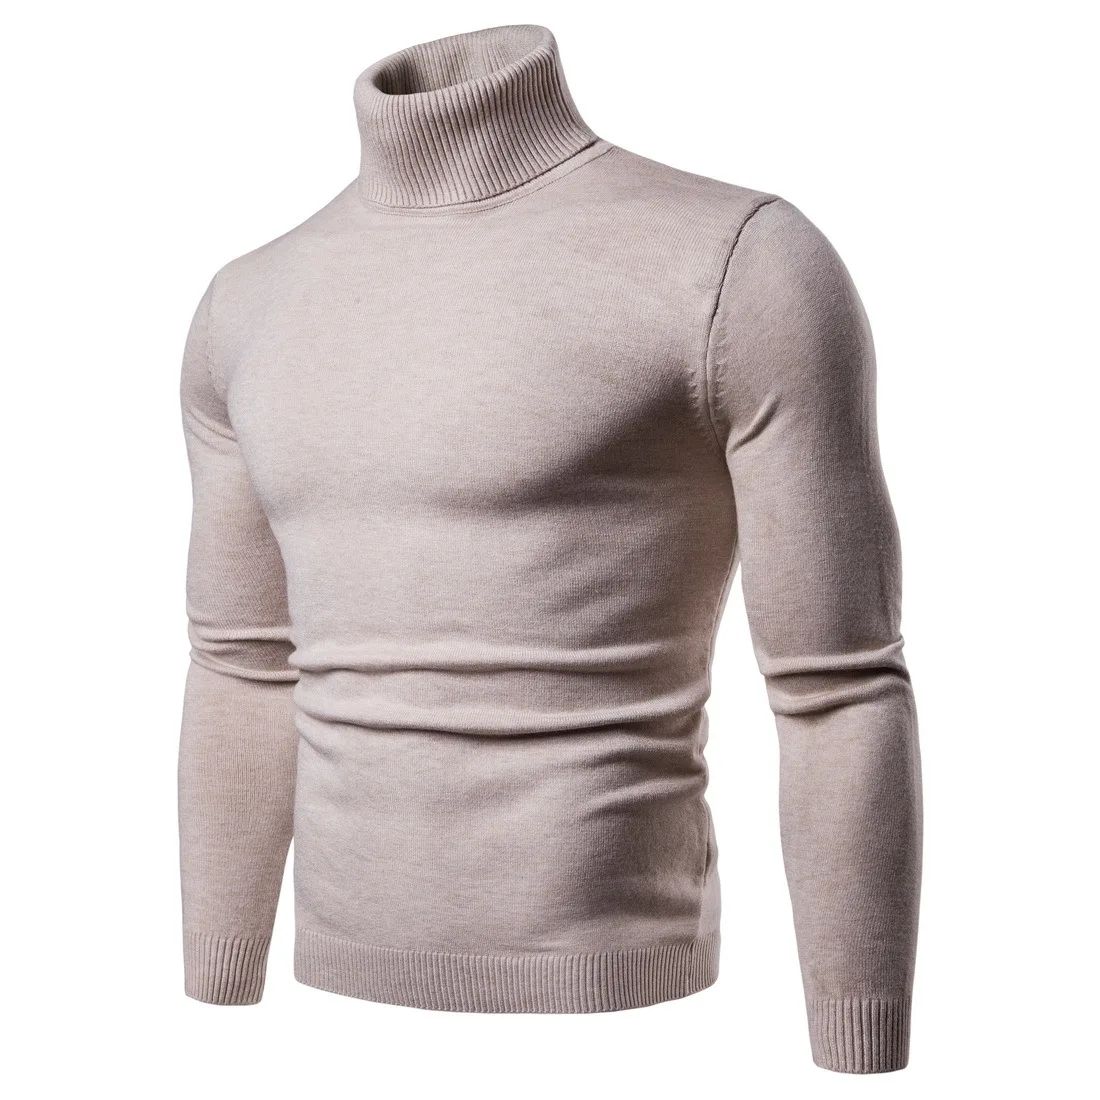 Solid Long Sleeve Sweater Man Style Slim Knitted  Round Neck  Sweaters